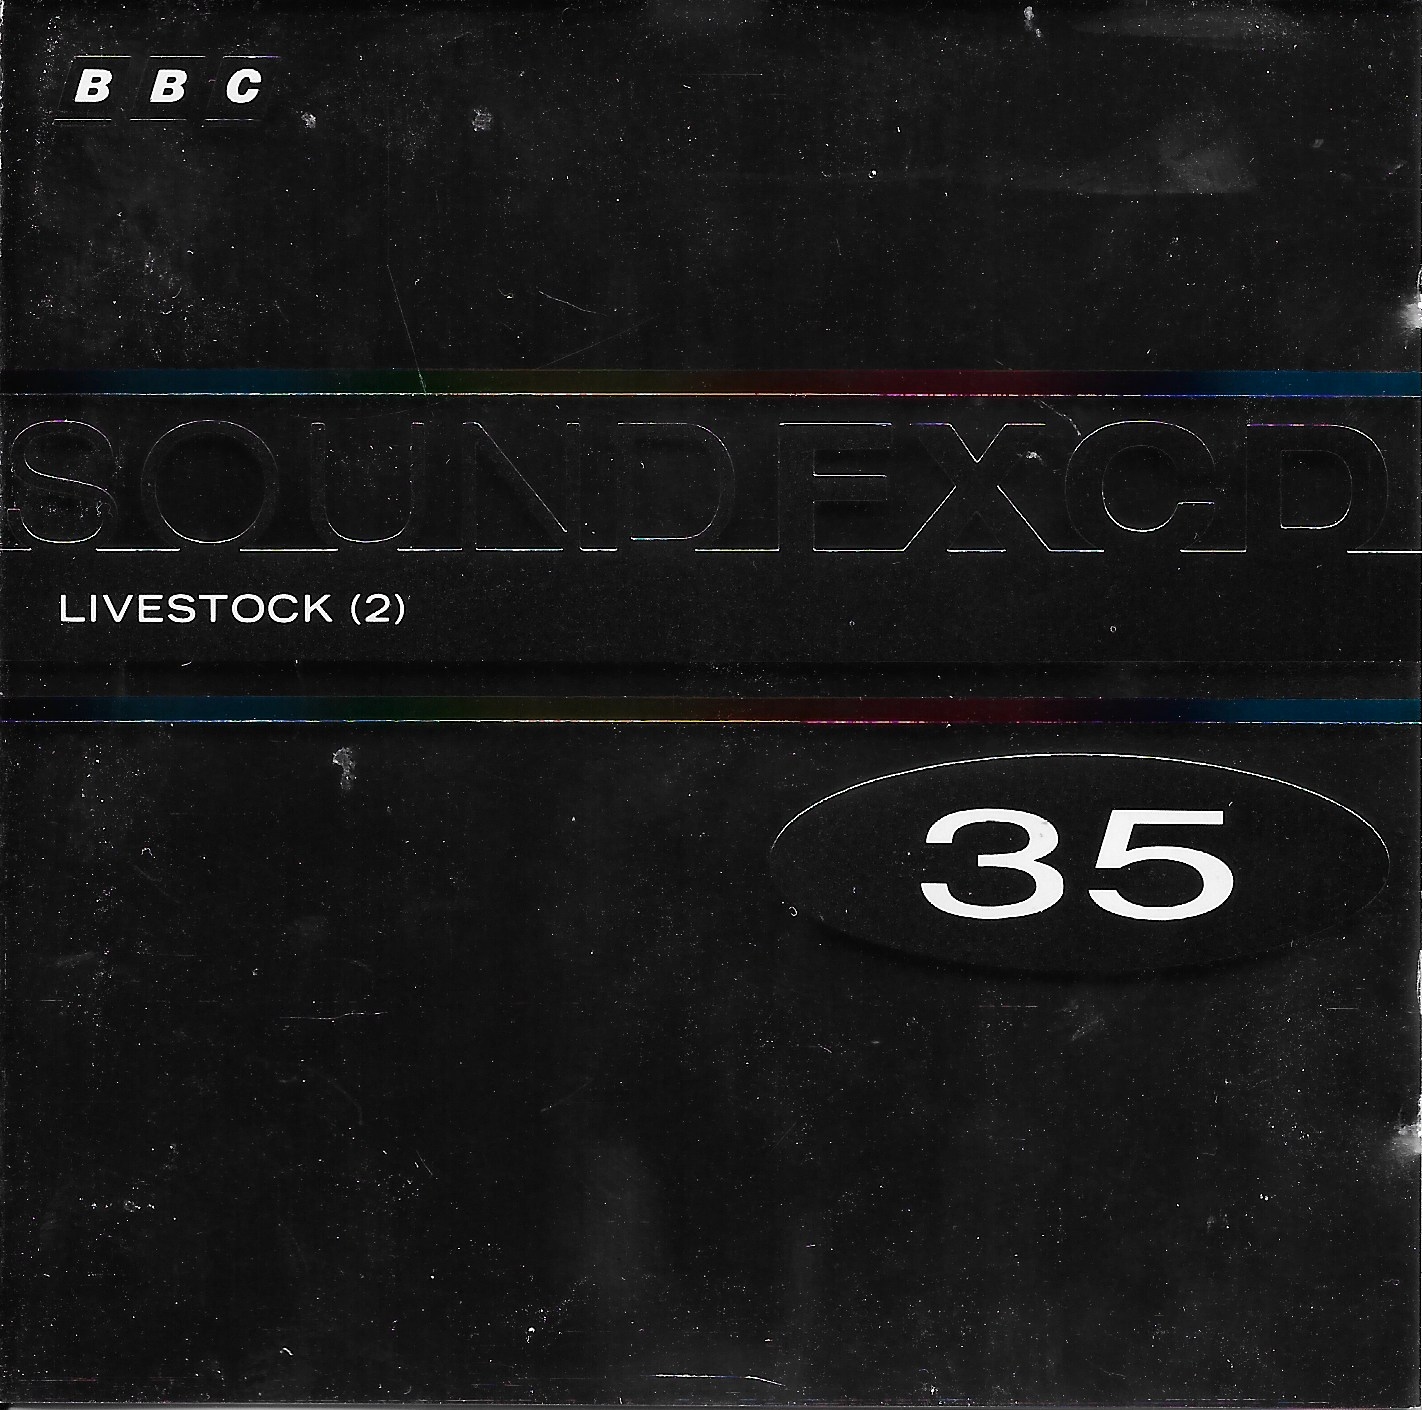 Picture of BBCCD SFX035 Livestock (2) by artist Various from the BBC cds - Records and Tapes library